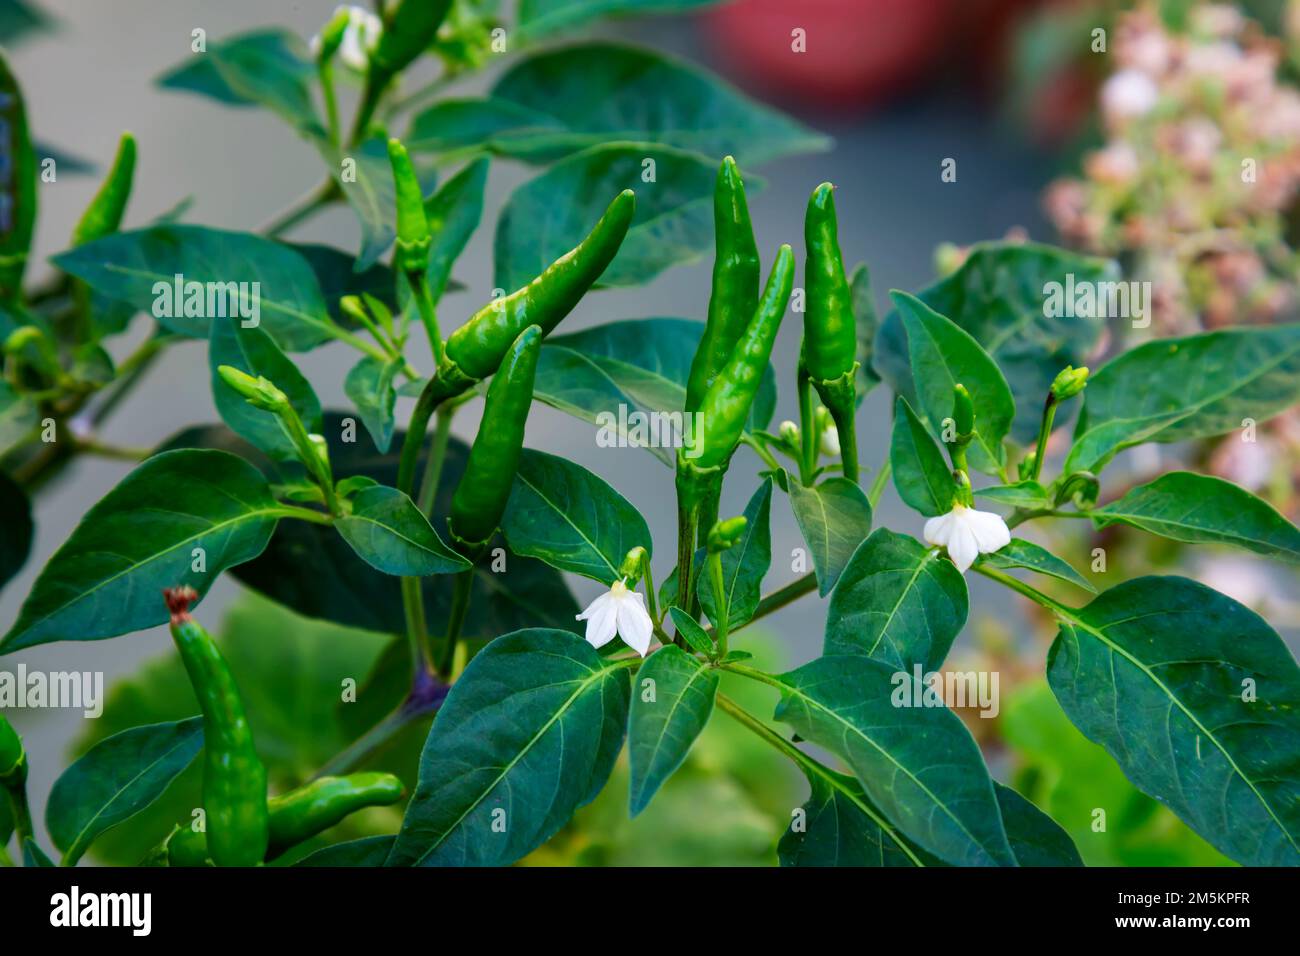 small green chillies also known as Capsicum annuum (chilli peppers) and Capsicum frutescens growing on tree. Stock Photo